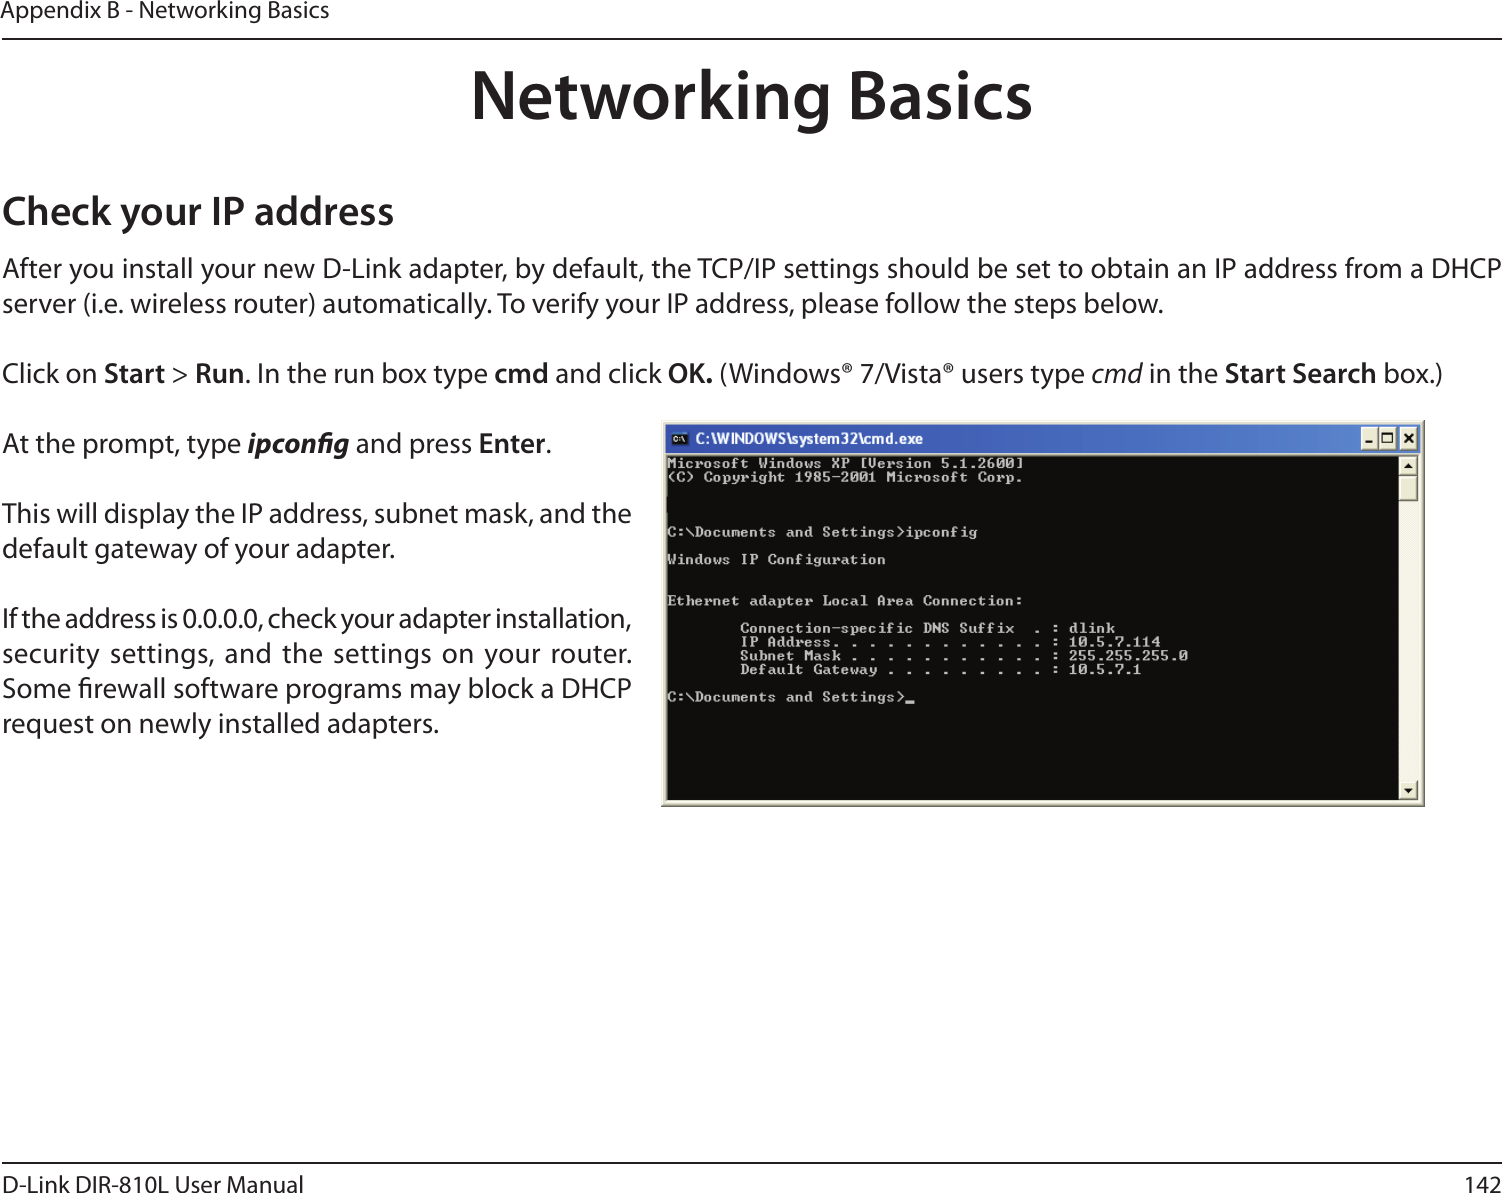 142D-Link DIR-810L User ManualAppendix B - Networking BasicsNetworking BasicsCheck your IP addressAfter you install your new D-Link adapter, by default, the TCP/IP settings should be set to obtain an IP address from a DHCP server (i.e. wireless router) automatically. To verify your IP address, please follow the steps below.Click on Start &gt; Run. In the run box type cmd and click OK. (Windows® 7/Vista® users type cmd in the Start Search box.)At the prompt, type ipcong and press Enter.This will display the IP address, subnet mask, and the default gateway of your adapter.If the address is 0.0.0.0, check your adapter installation, security  settings, and the settings on your router. Some rewall software programs may block a DHCP request on newly installed adapters. 